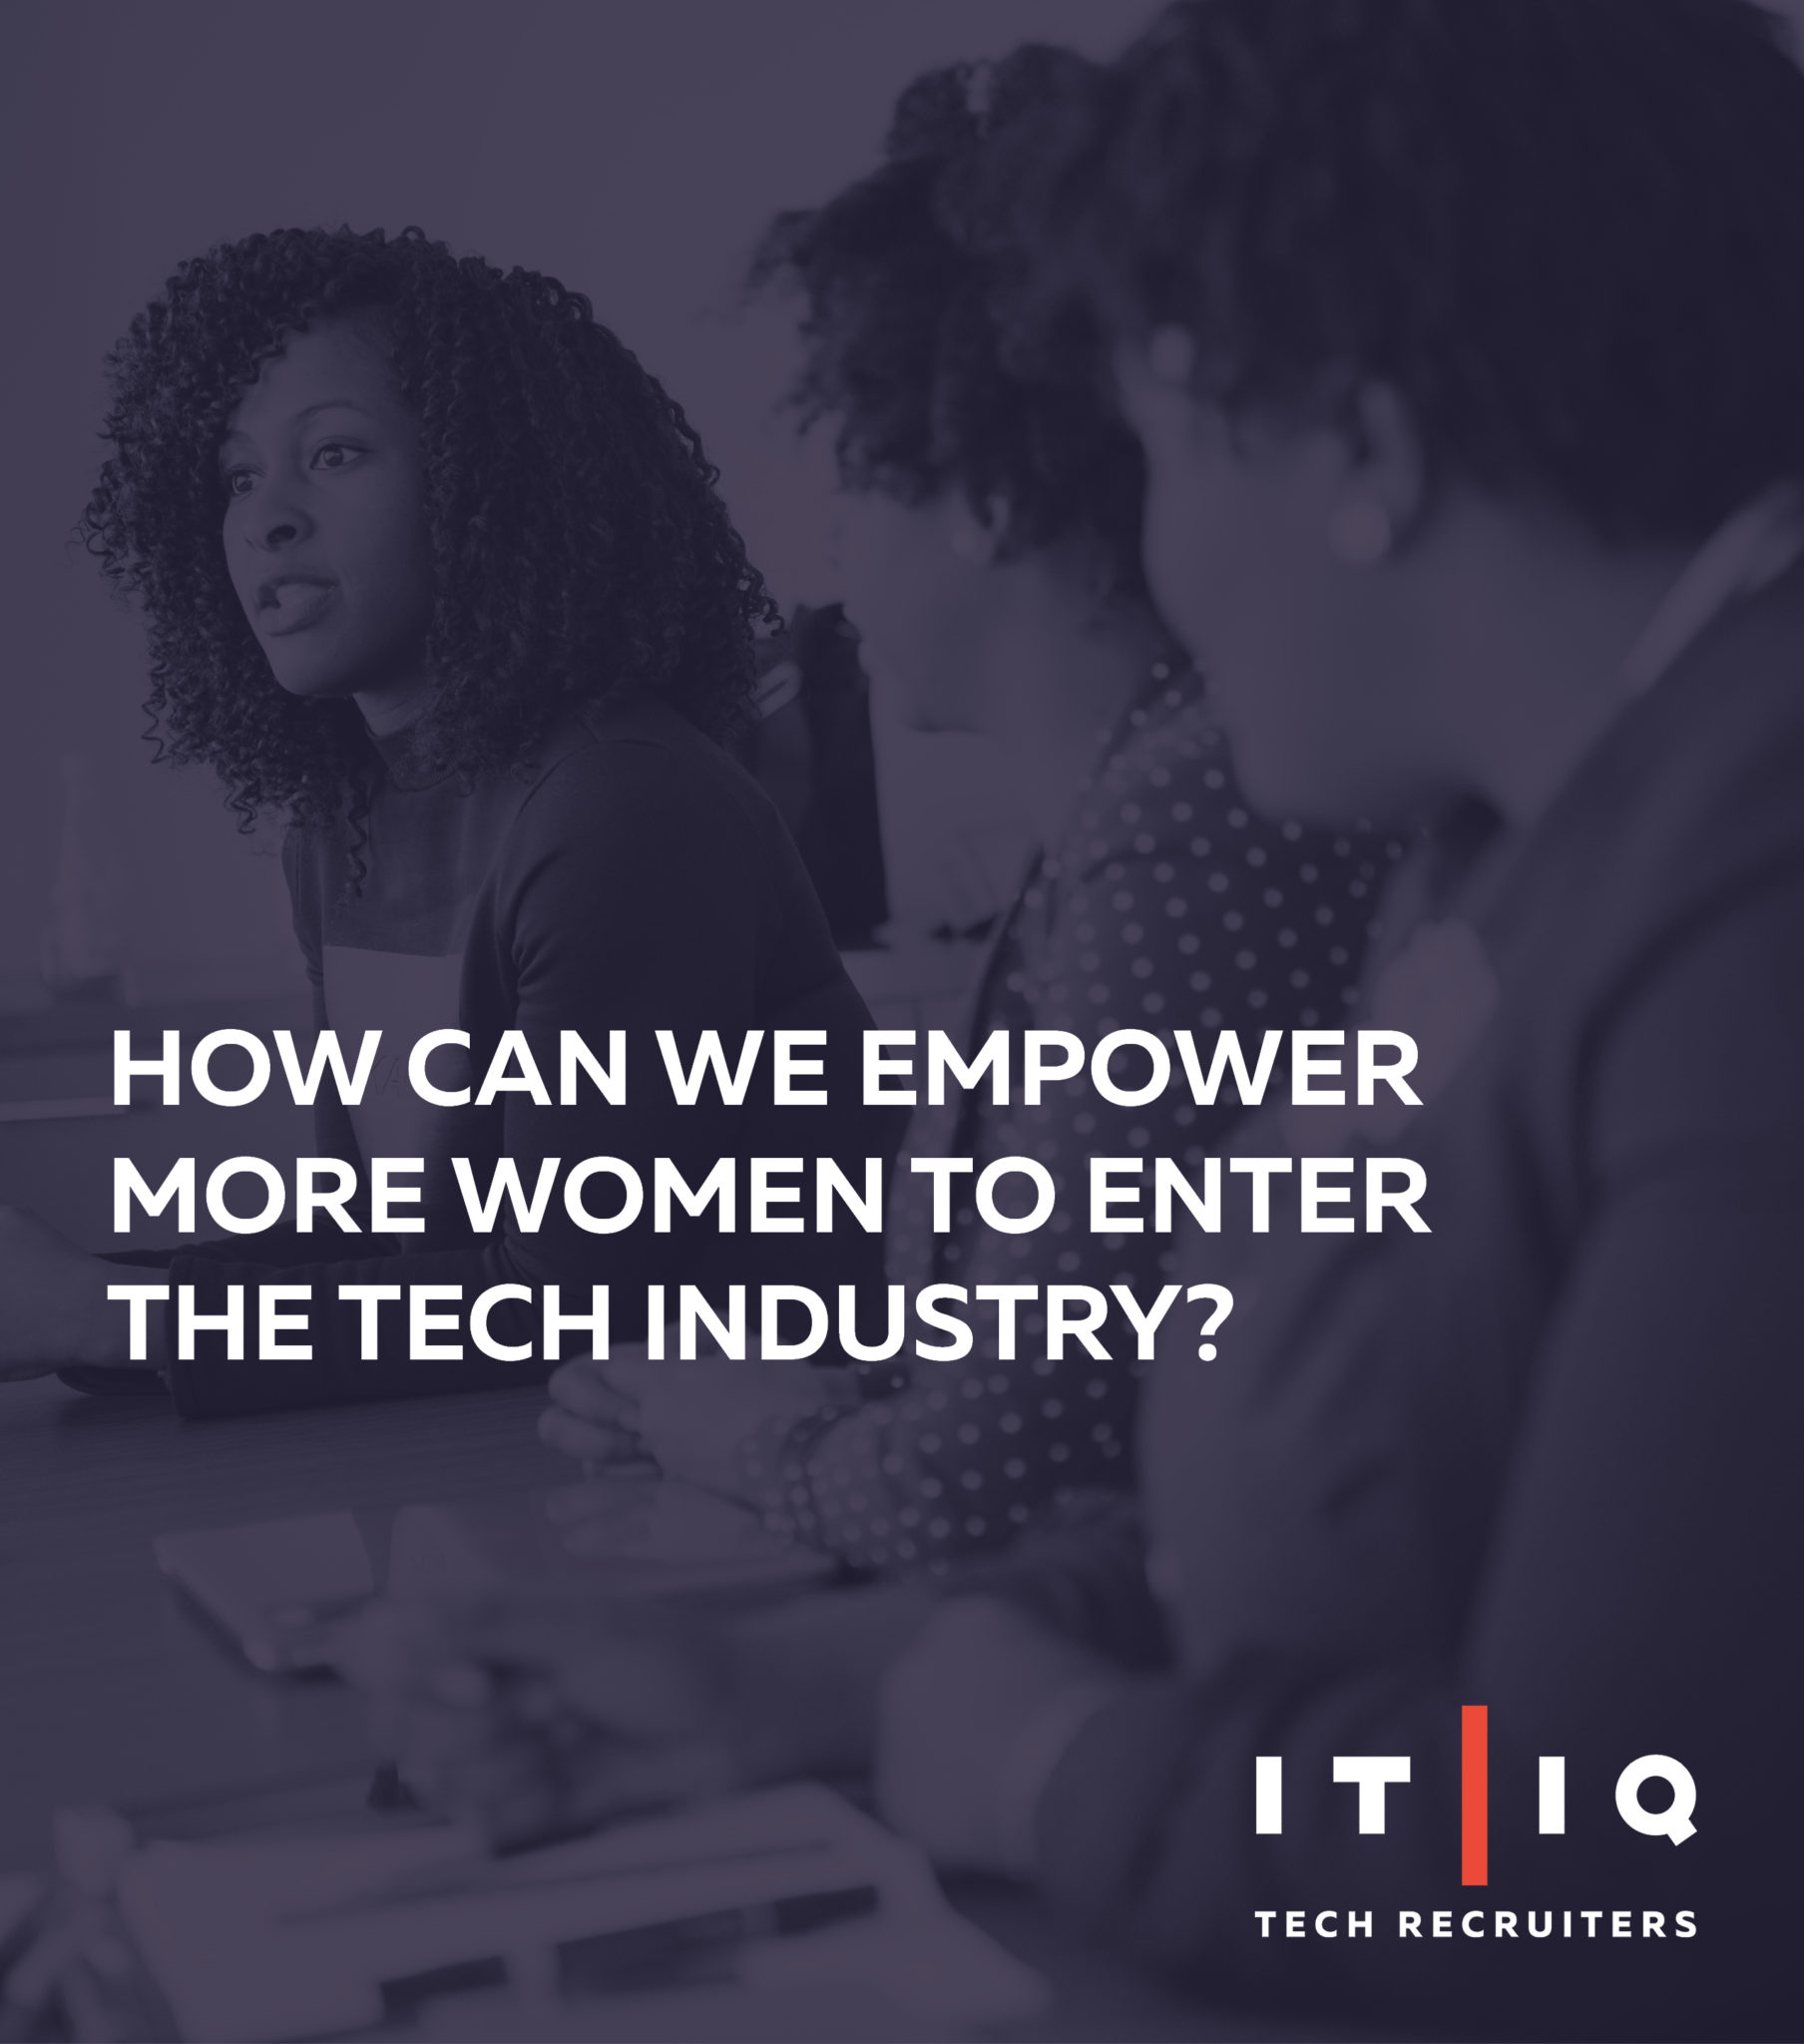 IT/IQ Recruiters " How can we empower more women to enter the tech industry? " Graphic, Photo background of women gathered for meeting